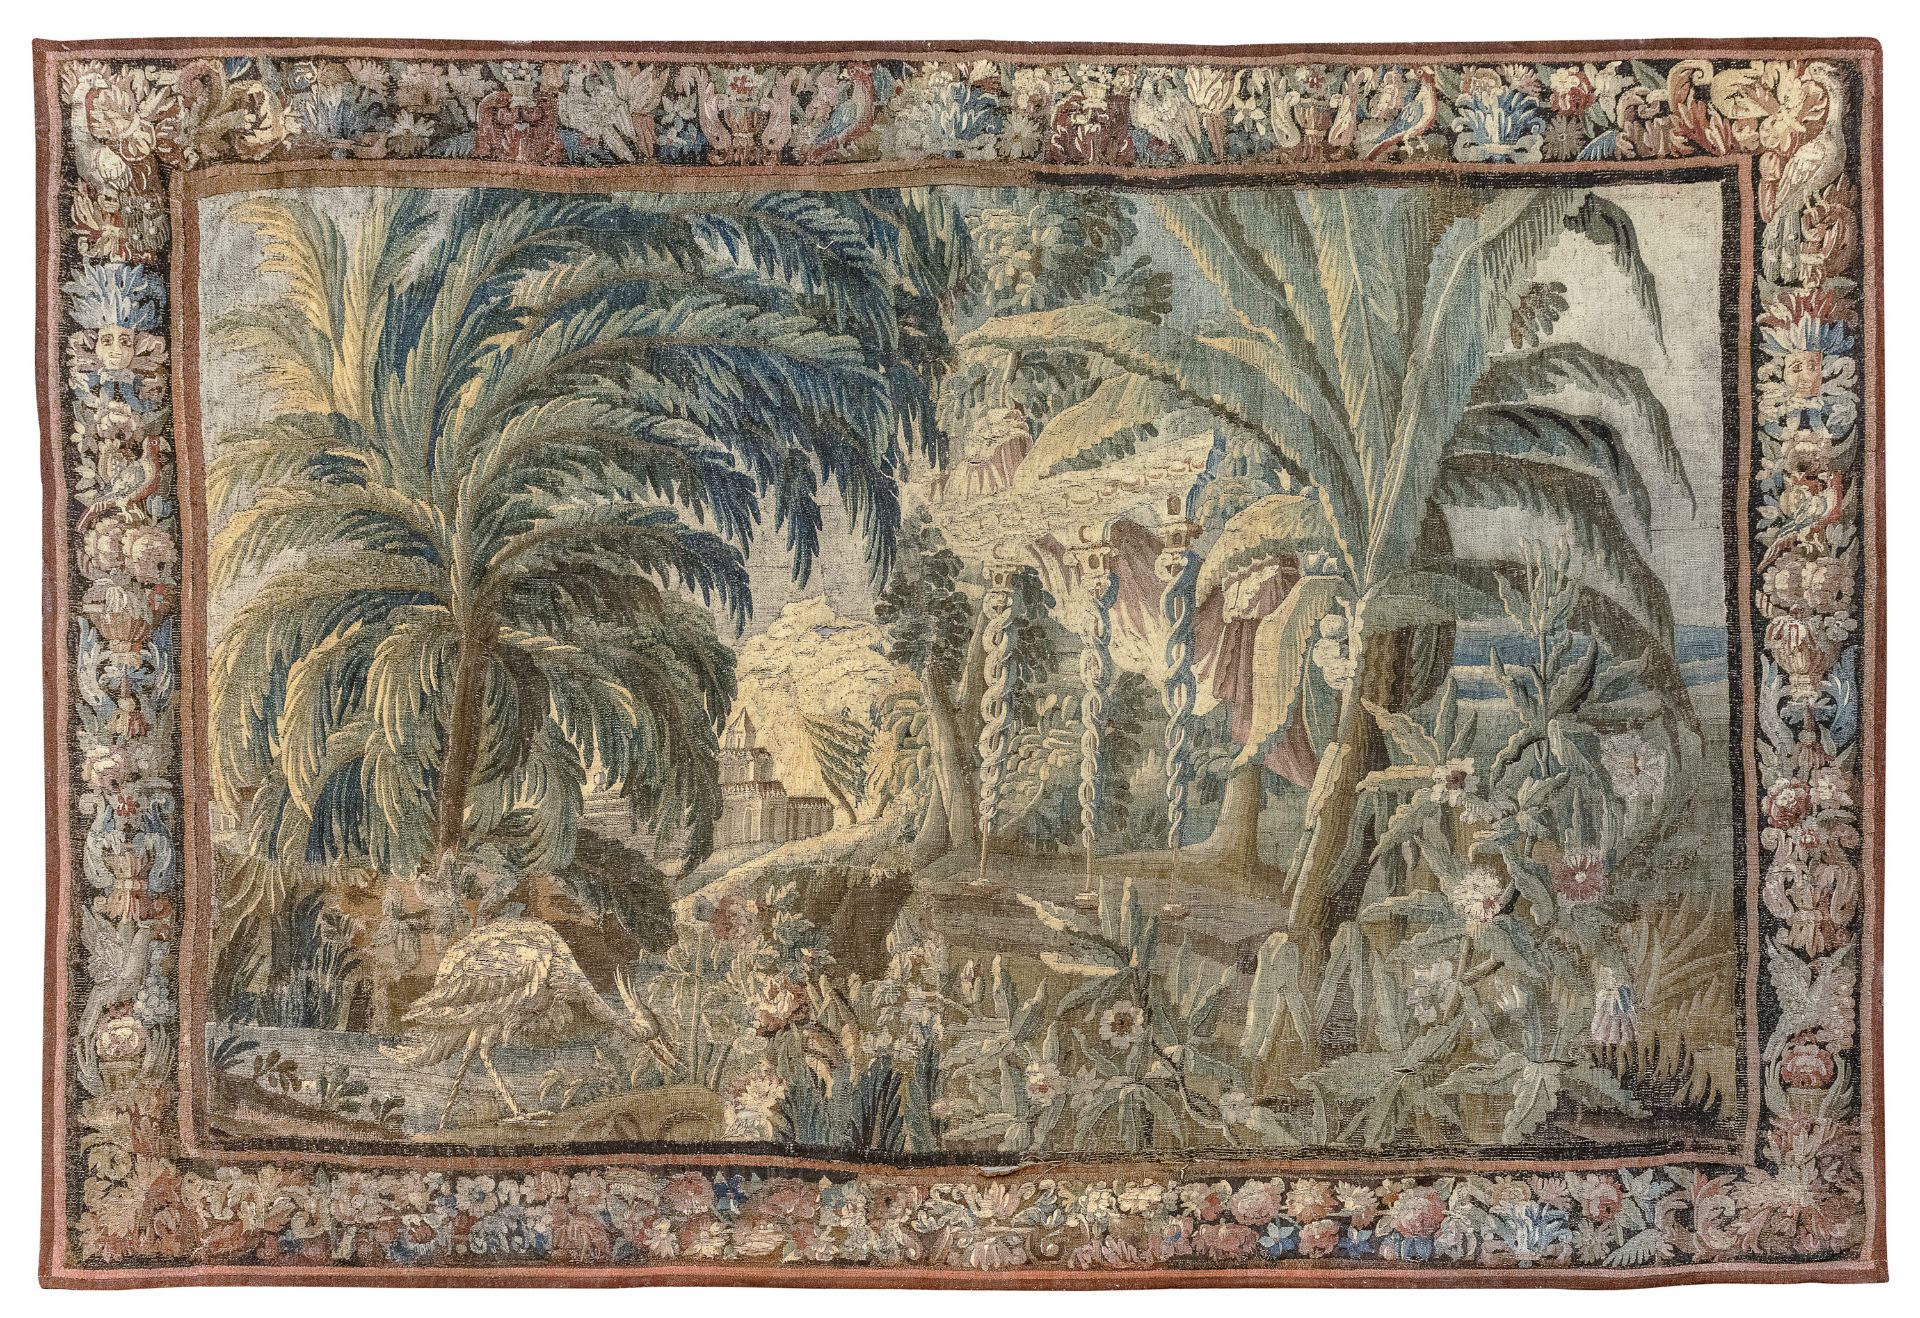 AUBOUSSON TAPESTRY FRANCE EARLY 18TH CENTURY